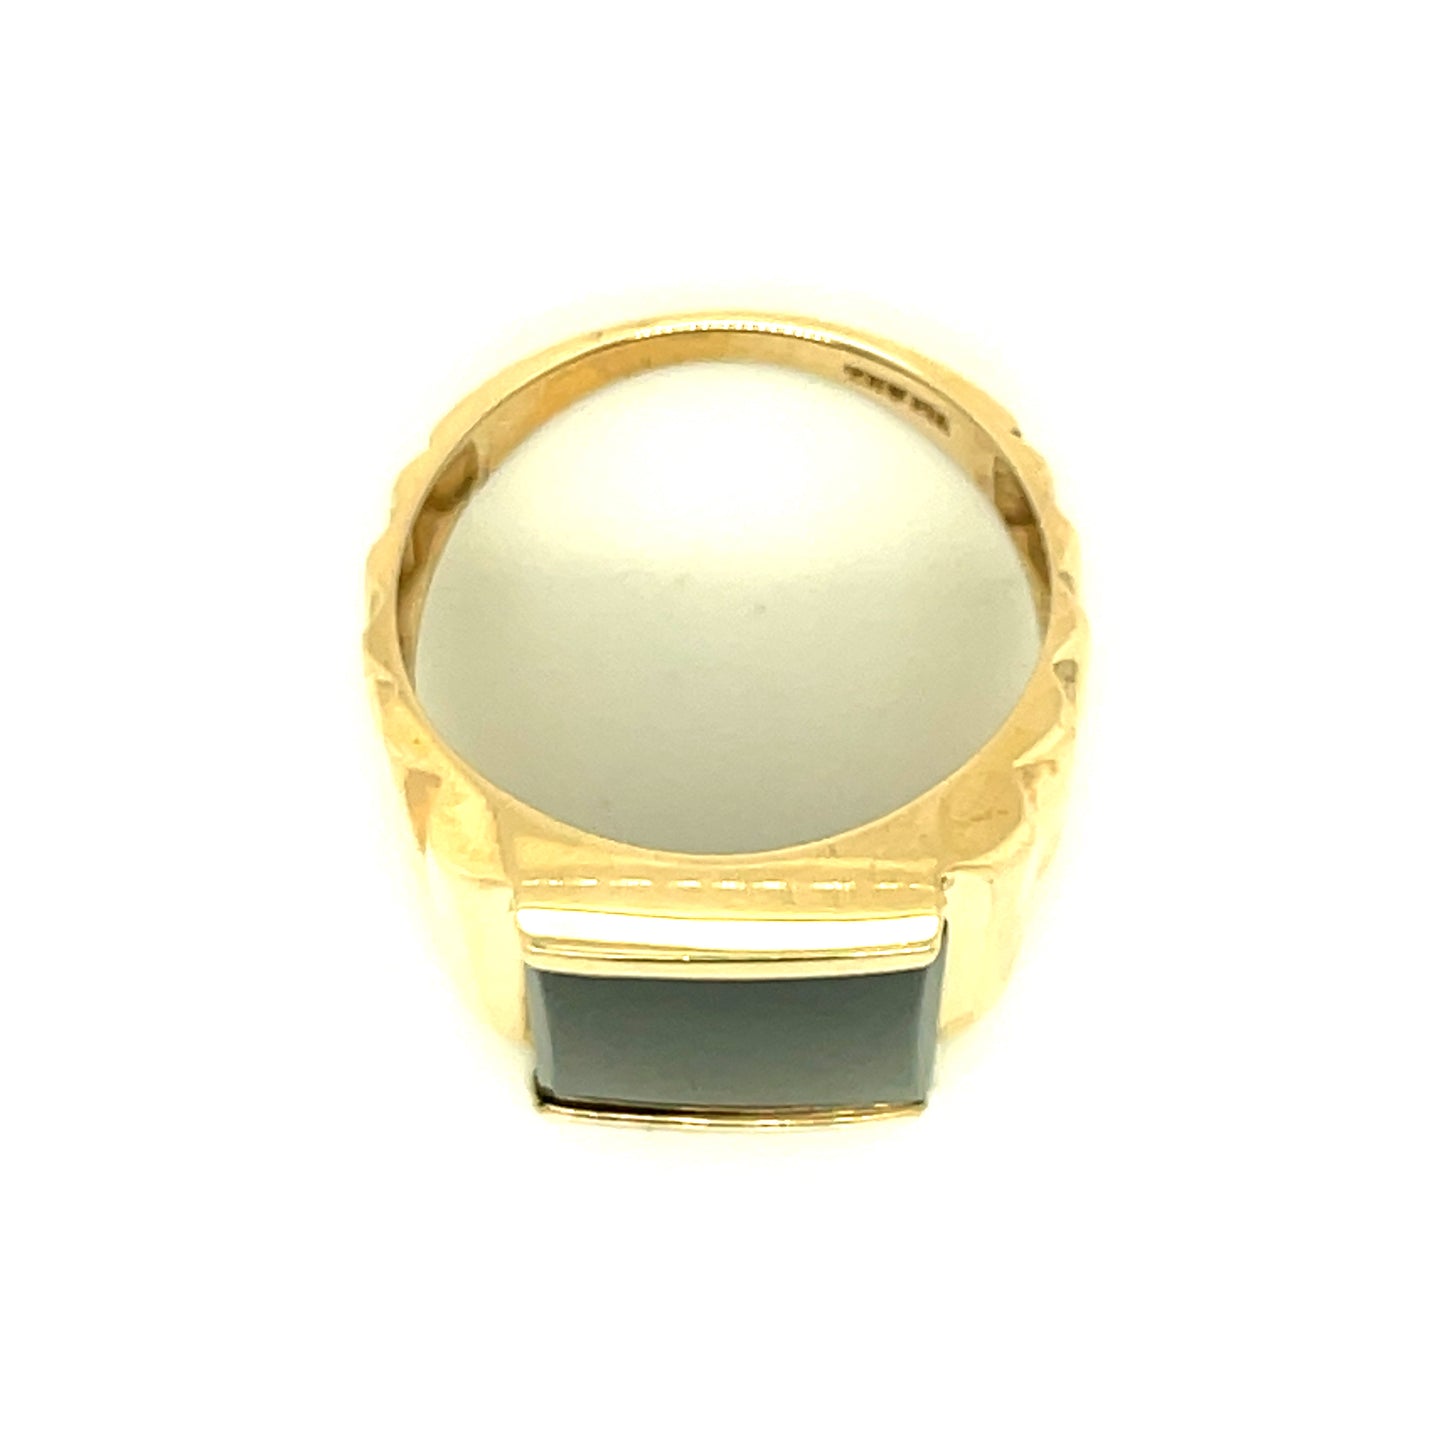 Vintage 14k Yellow Gold and Black Onyx Ring Size 9 1/4